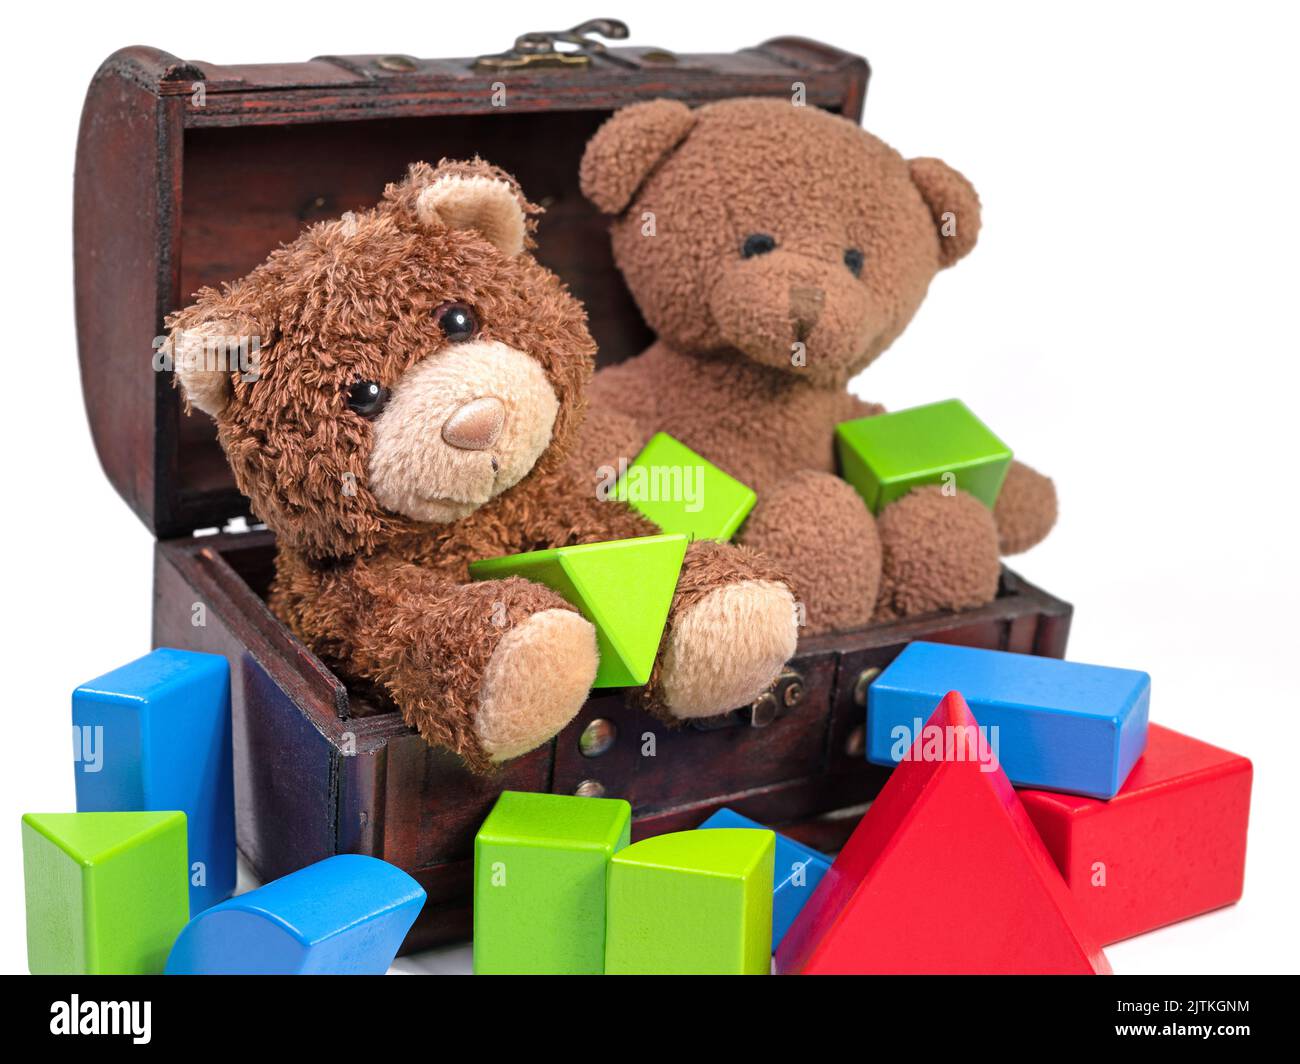 Plush bears and wooden building blocks against white background Stock Photo